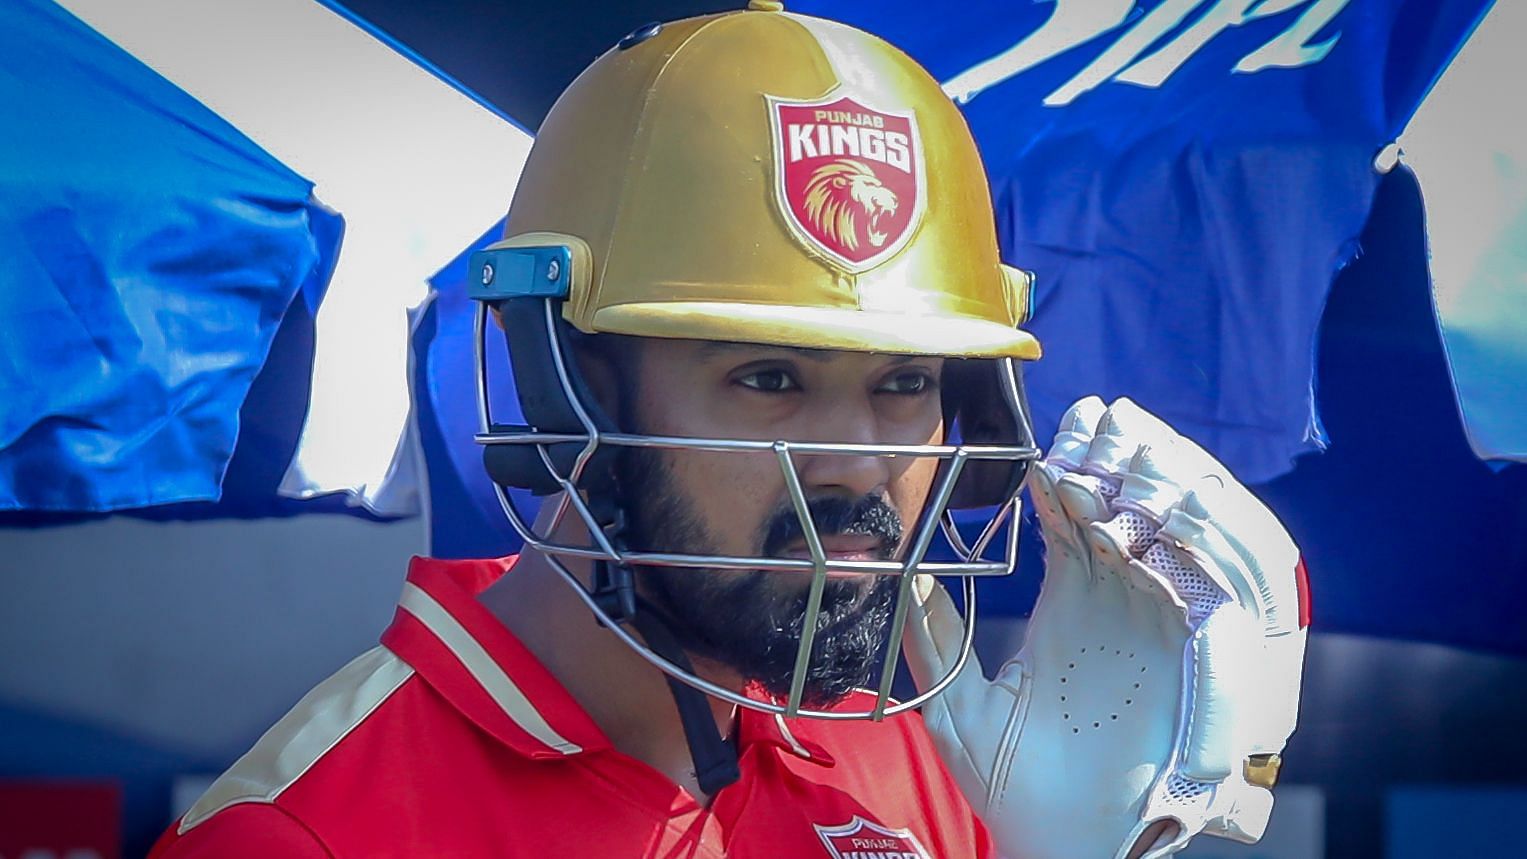 Punjab Kings skipper KL Rahul has been hospitalised due to acute appendicitis and will likely undergo a surgery.